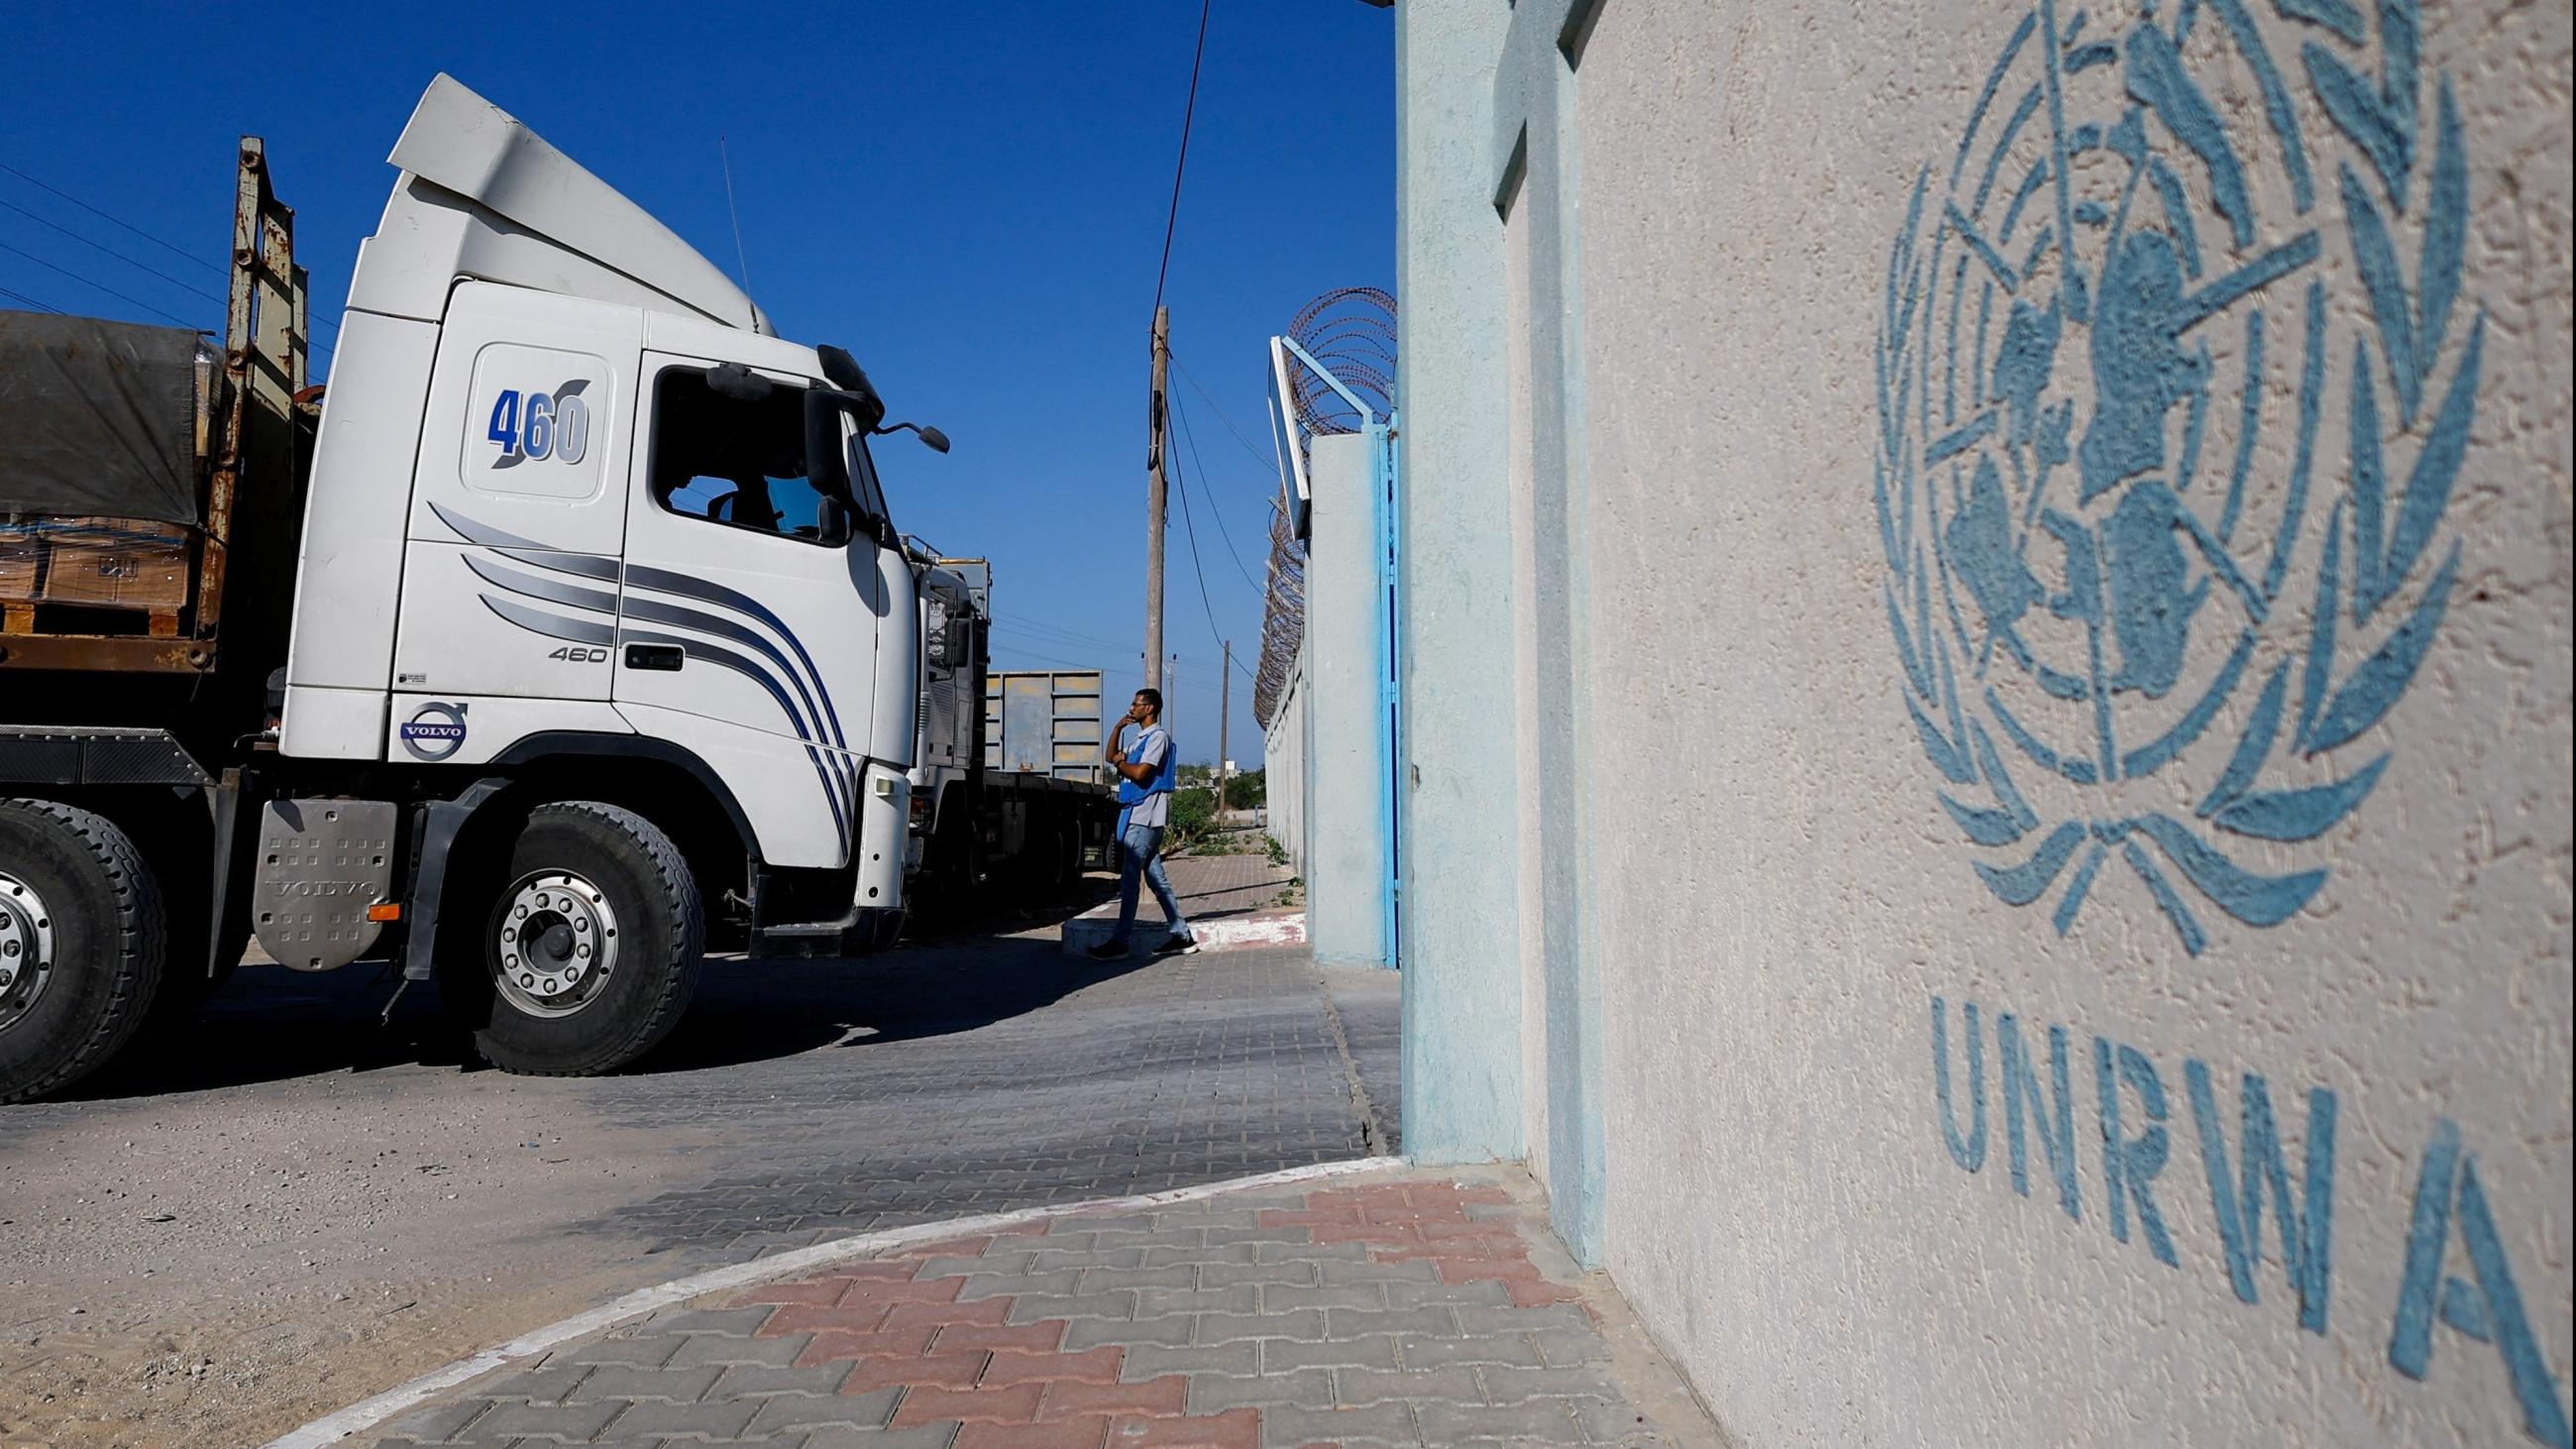 A UN Truck waits at an entrance with UNRWA label